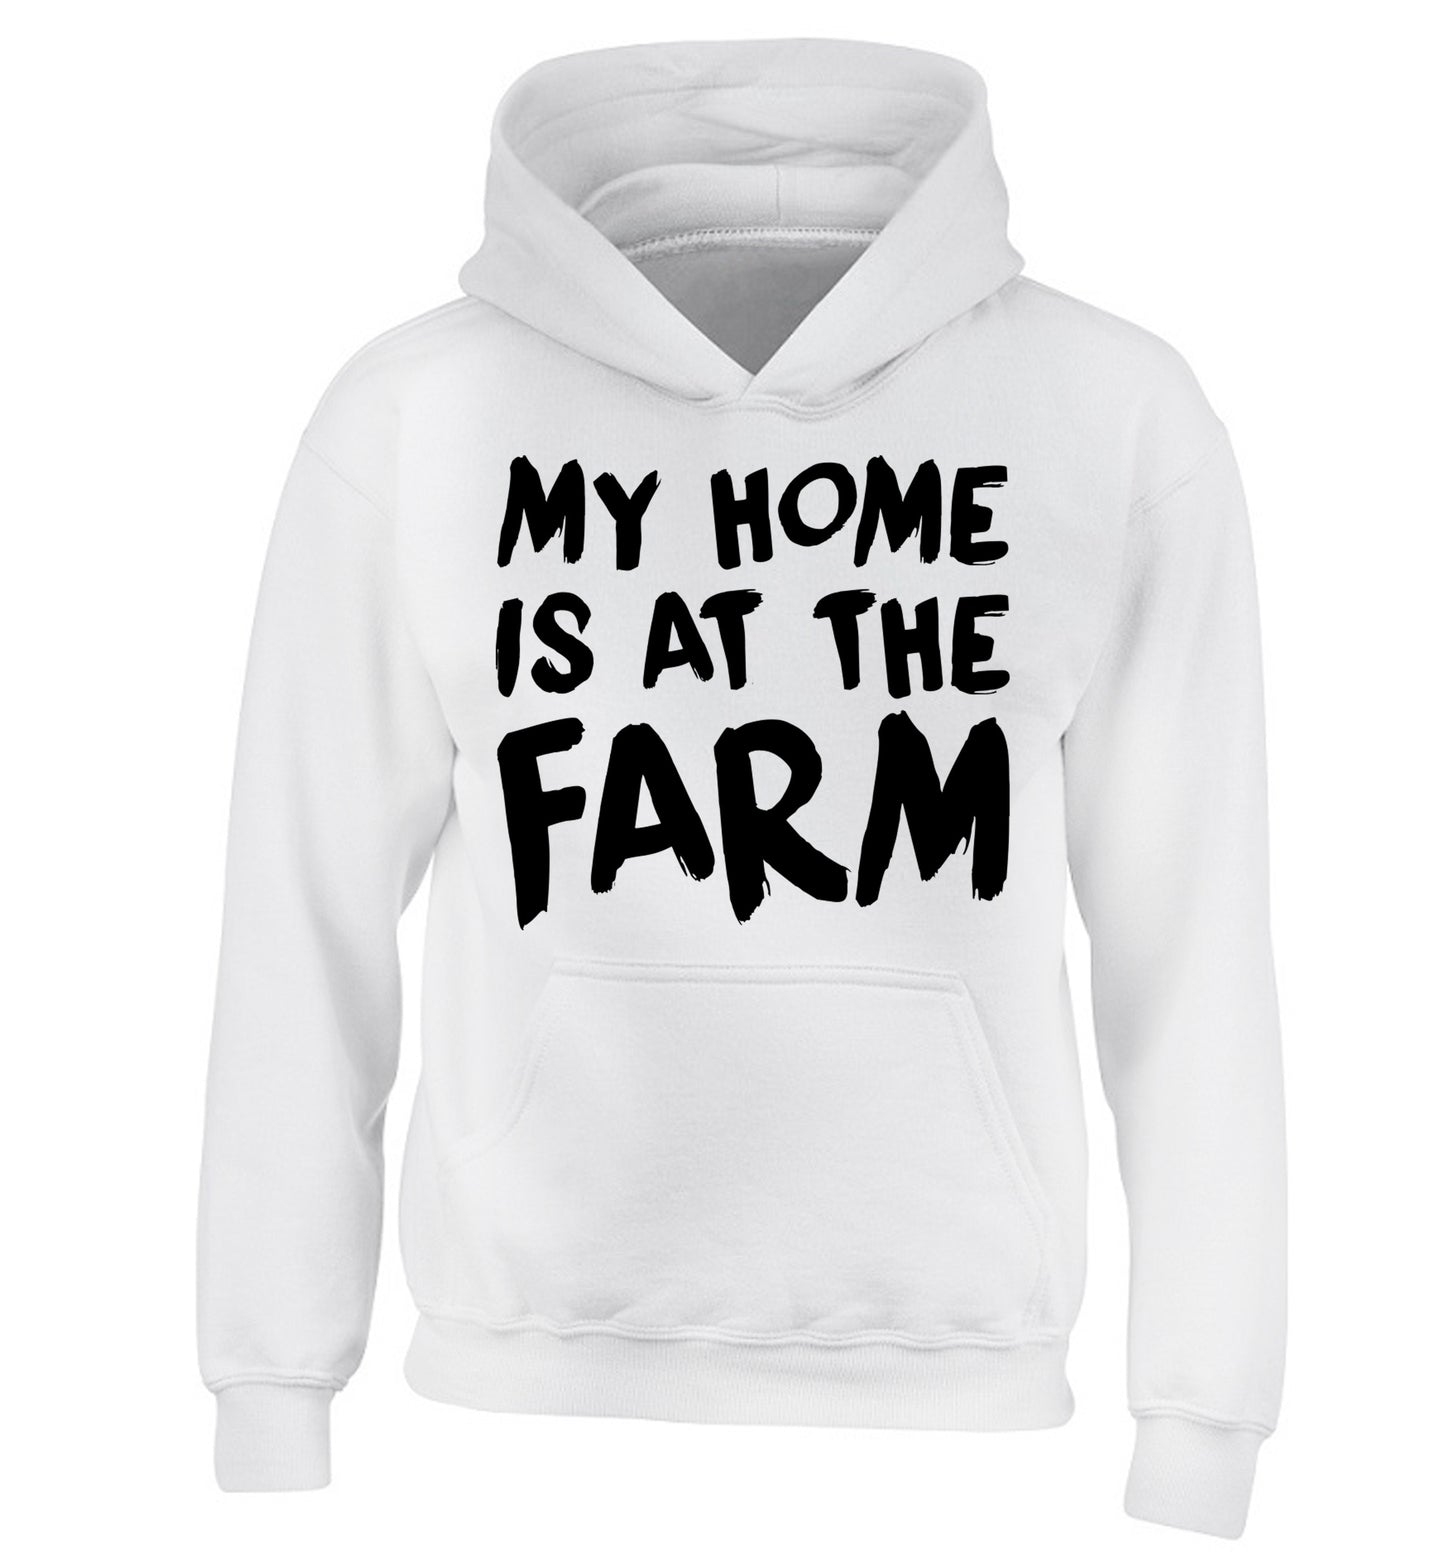 My home is at the farm children's white hoodie 12-14 Years